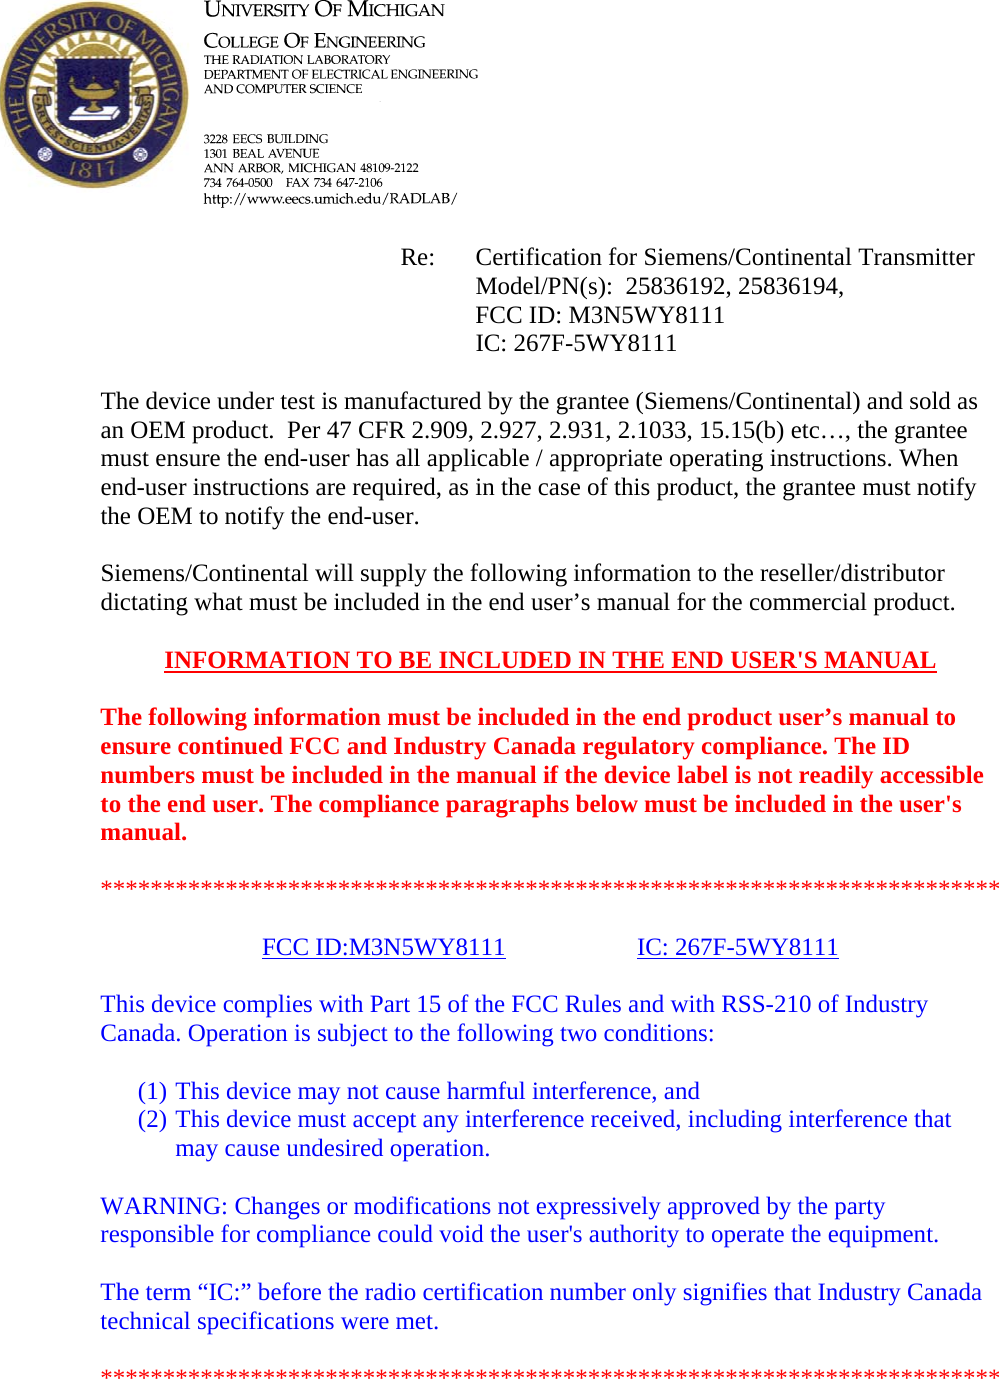            Re: Certification for Siemens/Continental Transmitter      Model/PN(s):  25836192, 25836194,       FCC ID: M3N5WY8111      IC: 267F-5WY8111  The device under test is manufactured by the grantee (Siemens/Continental) and sold as an OEM product.  Per 47 CFR 2.909, 2.927, 2.931, 2.1033, 15.15(b) etc…, the grantee must ensure the end-user has all applicable / appropriate operating instructions. When end-user instructions are required, as in the case of this product, the grantee must notify the OEM to notify the end-user.   Siemens/Continental will supply the following information to the reseller/distributor dictating what must be included in the end user’s manual for the commercial product.   INFORMATION TO BE INCLUDED IN THE END USER&apos;S MANUAL   The following information must be included in the end product user’s manual to ensure continued FCC and Industry Canada regulatory compliance. The ID numbers must be included in the manual if the device label is not readily accessible to the end user. The compliance paragraphs below must be included in the user&apos;s manual.  ************************************************************************  FCC ID:M3N5WY8111   IC: 267F-5WY8111  This device complies with Part 15 of the FCC Rules and with RSS-210 of Industry Canada. Operation is subject to the following two conditions:  (1) This device may not cause harmful interference, and (2) This device must accept any interference received, including interference that may cause undesired operation.  WARNING: Changes or modifications not expressively approved by the party responsible for compliance could void the user&apos;s authority to operate the equipment.  The term “IC:” before the radio certification number only signifies that Industry Canada technical specifications were met.  ************************************************************************  